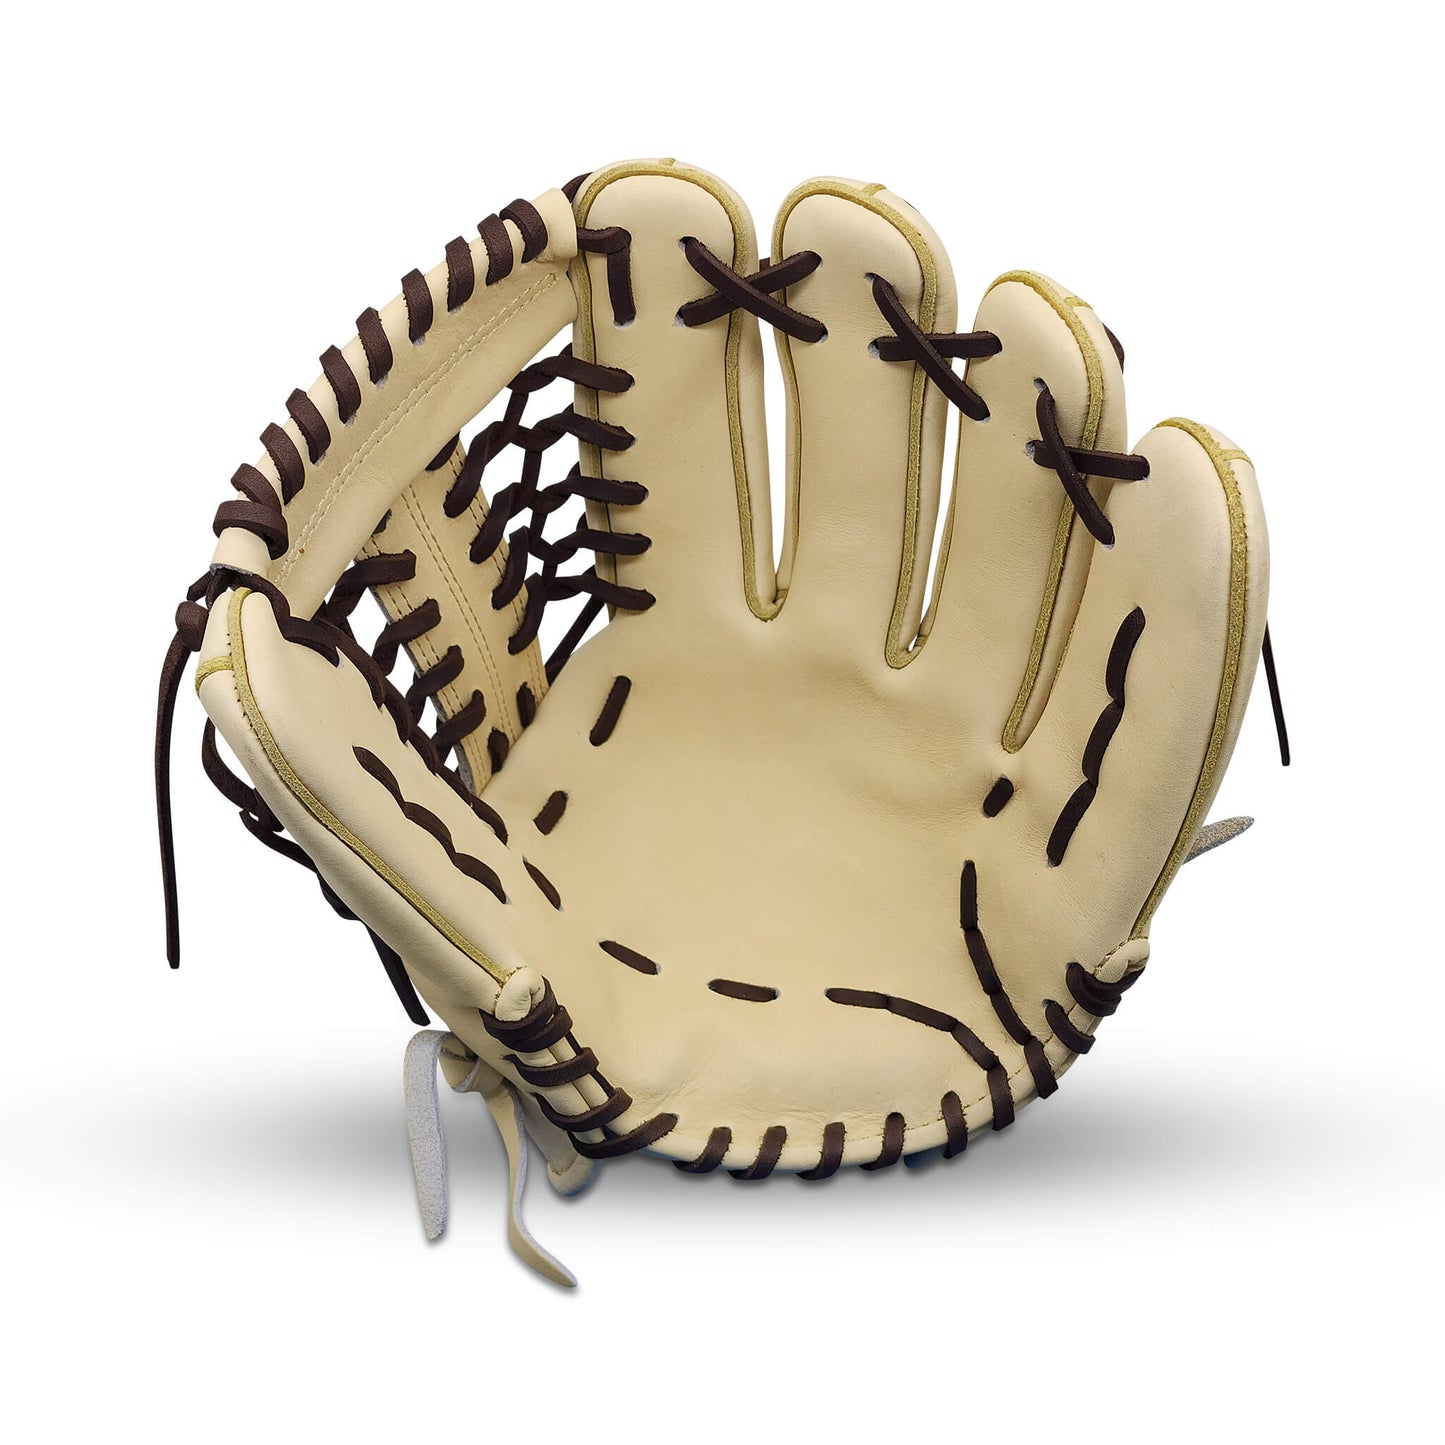 Titan Series Limited Edition 11.75” Infield Glove with T-Web, Camel Shell and Palm, Dark Brown Lacing, and Embroidered Texas Flag – RHT